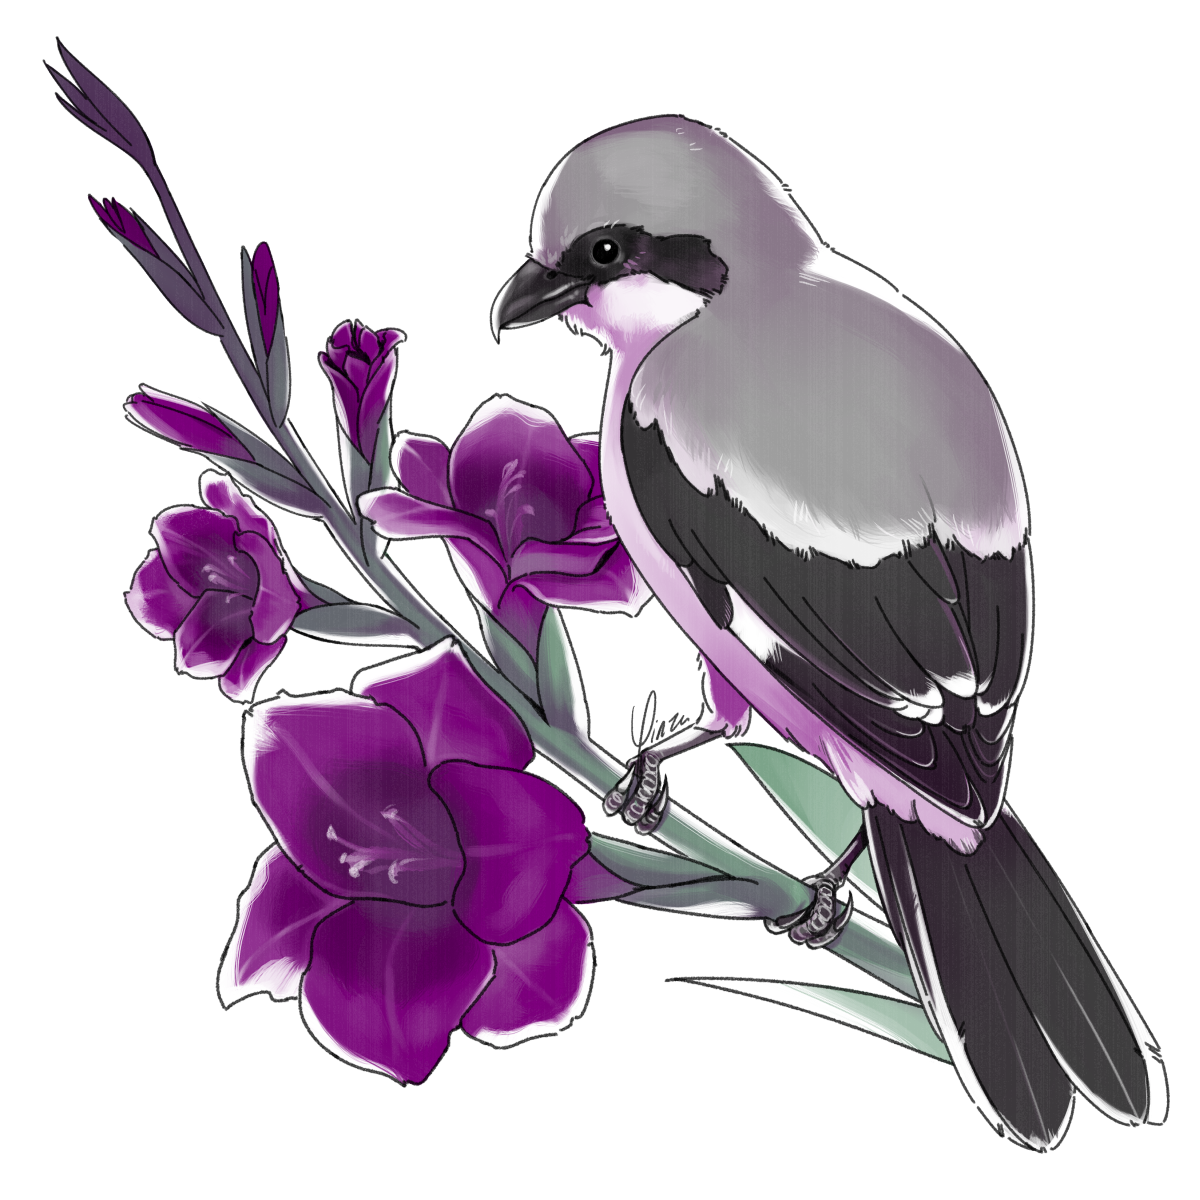 Digital artwork of a bird perched on the stem of a purple gladiolus flower. The bird is a shrike, with feathers in grey, black, and white, accented with a purple shadow color. It has its back mostly turned towards the viewer and its head to the side, essentially looking over its shoulder. Three of the gladiolus flowers are open, the bottommost flower being the largest and the others getting smaller farther up, the stem ending in several buds.